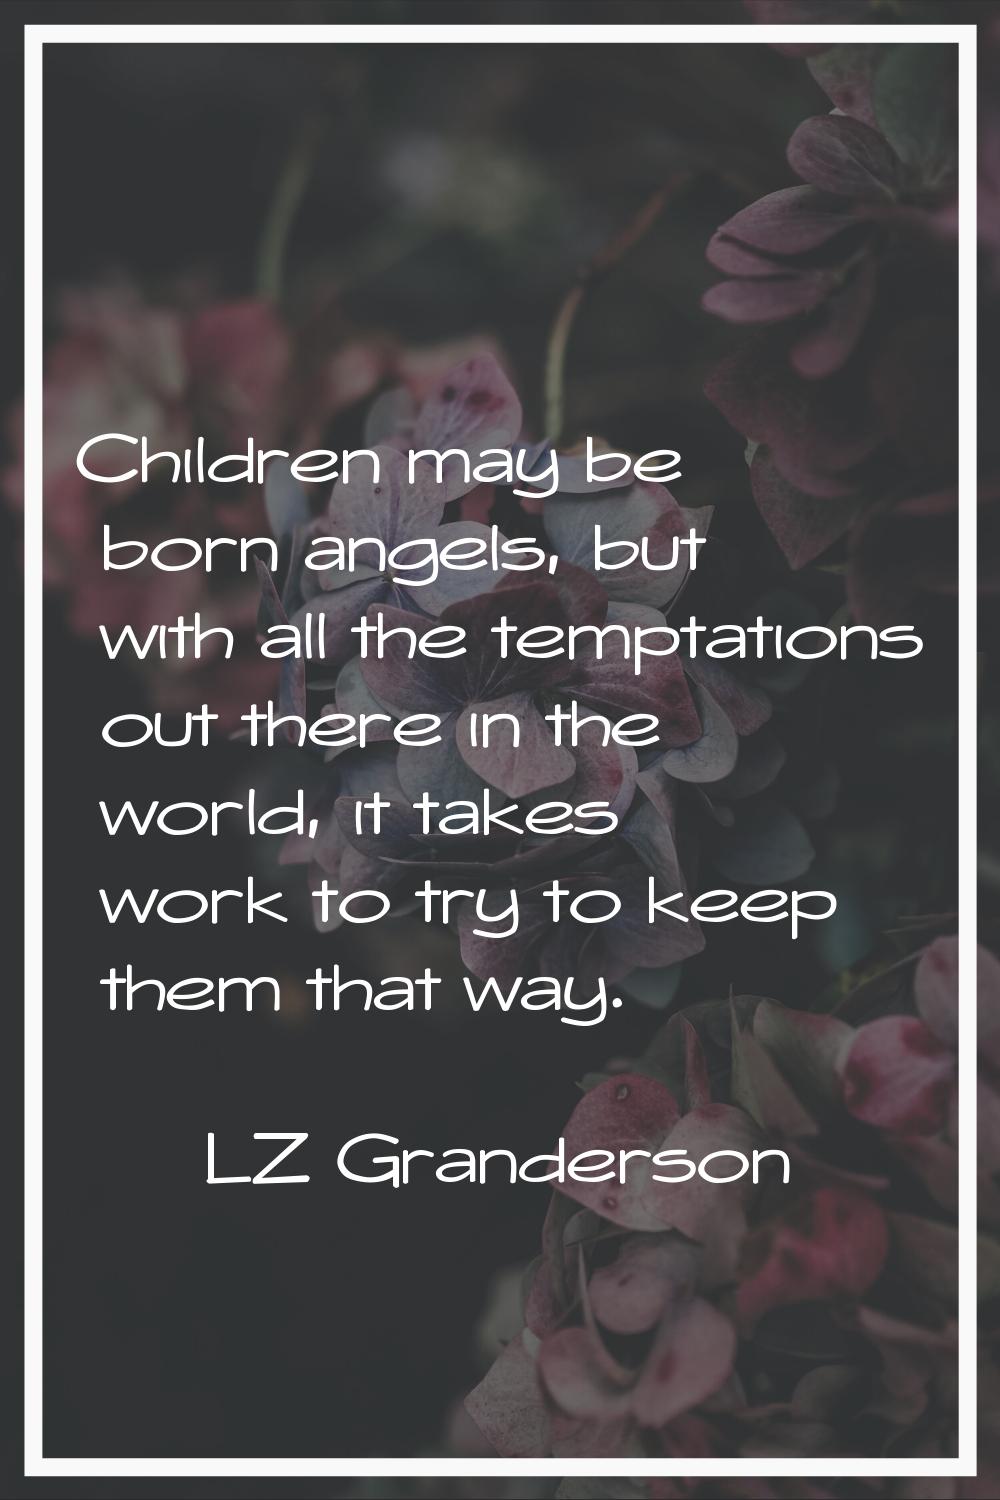 Children may be born angels, but with all the temptations out there in the world, it takes work to 